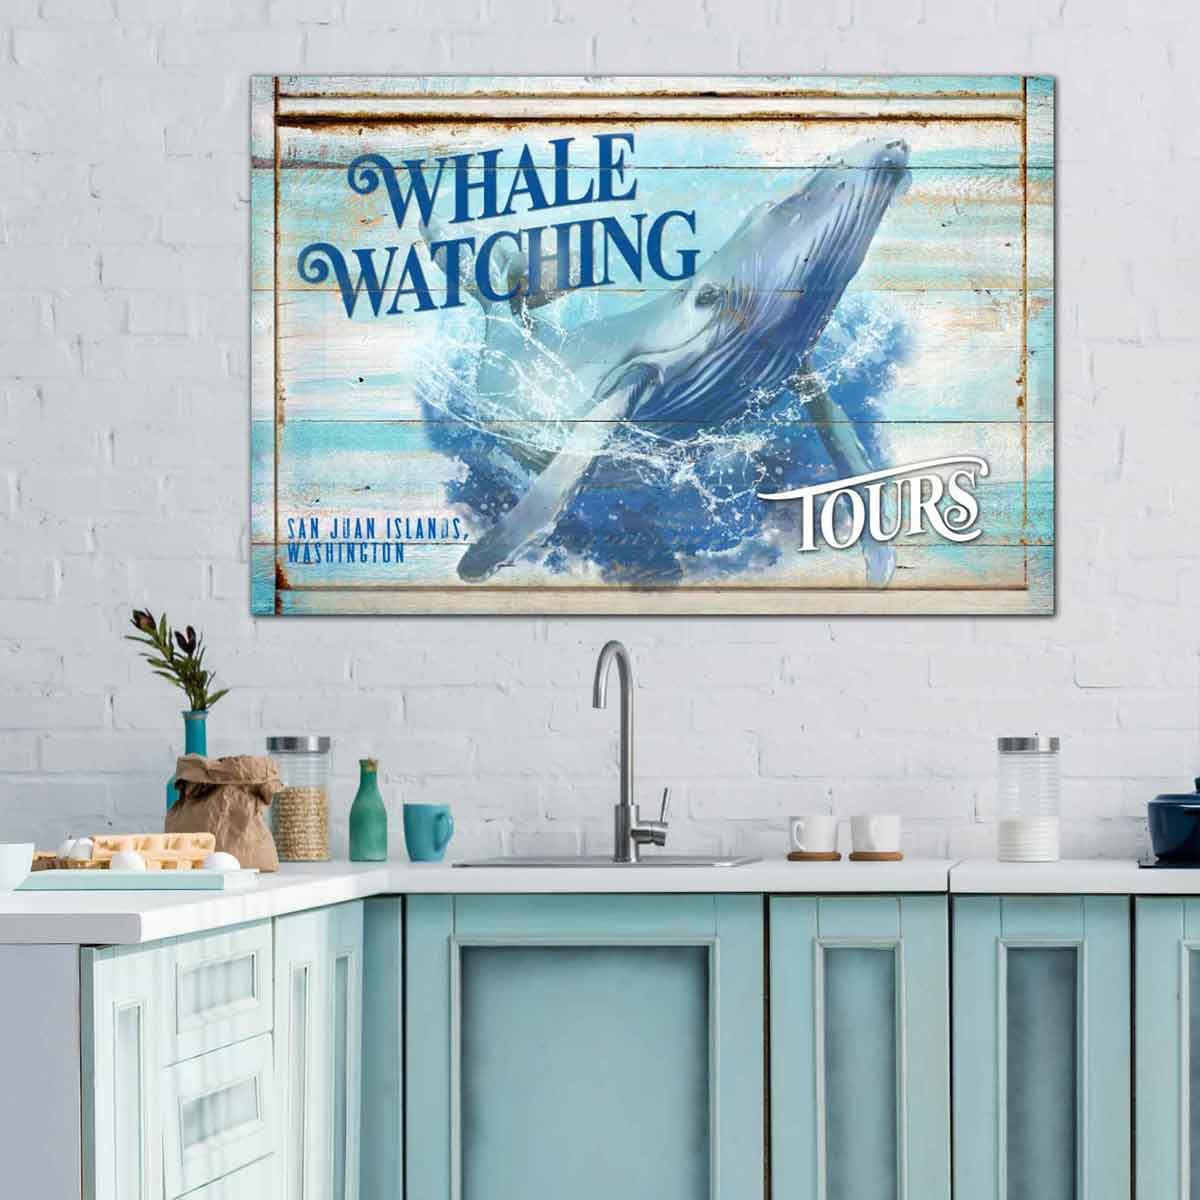 Do you like to watch the Whales. You will love this custom Art - Just add your name & location. This faux wood frame looks like old wood in beachy teal colors. 